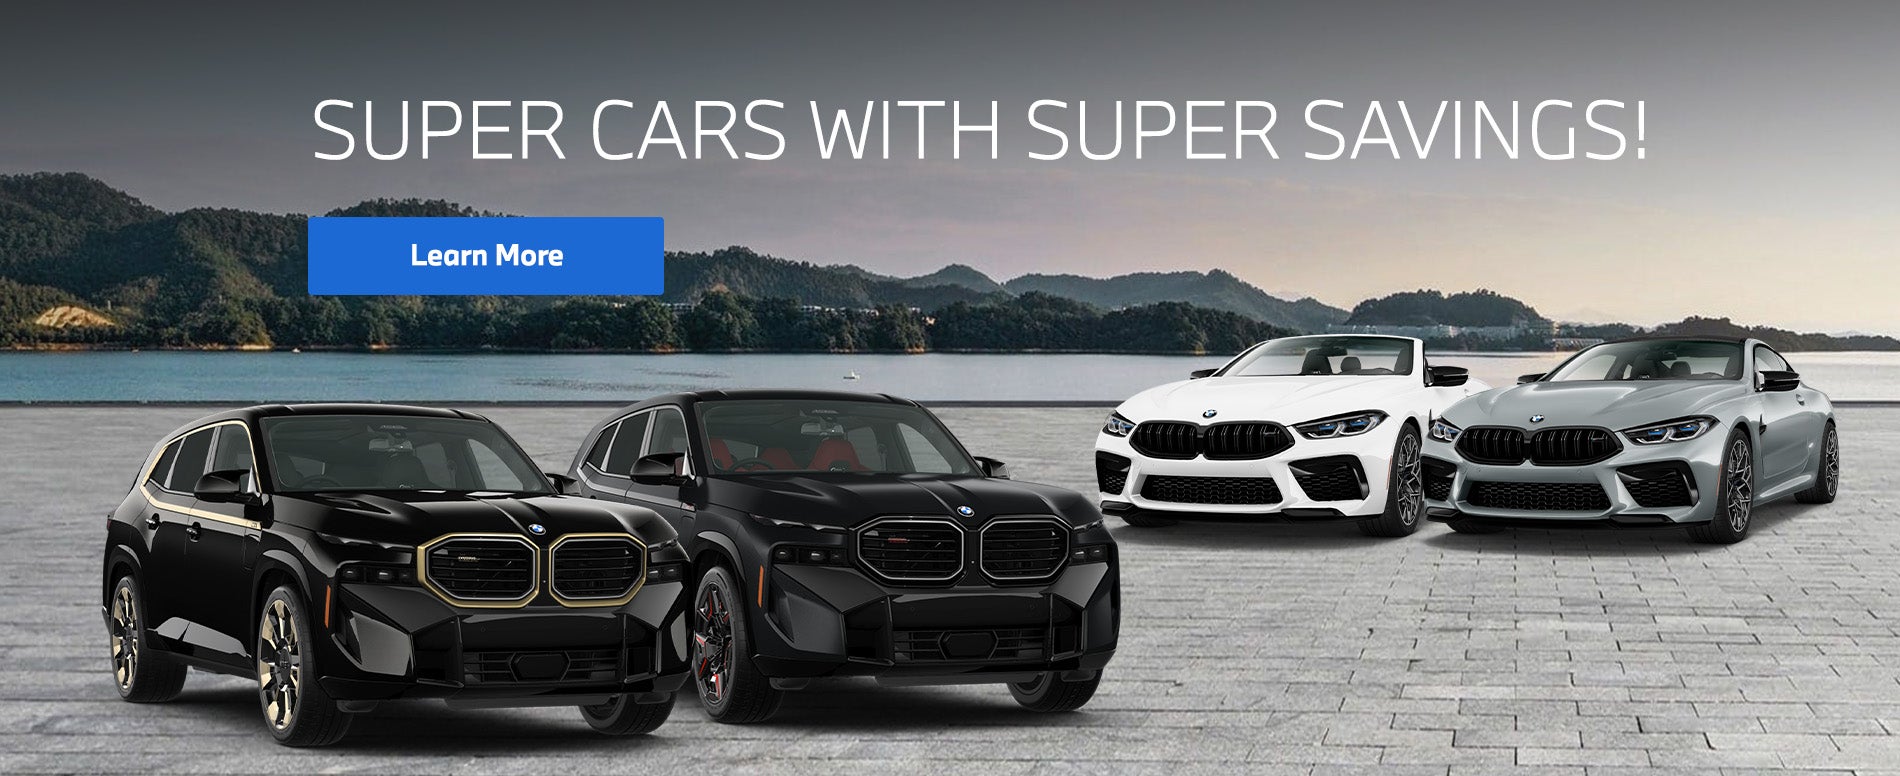 Super Cars with Super Savings